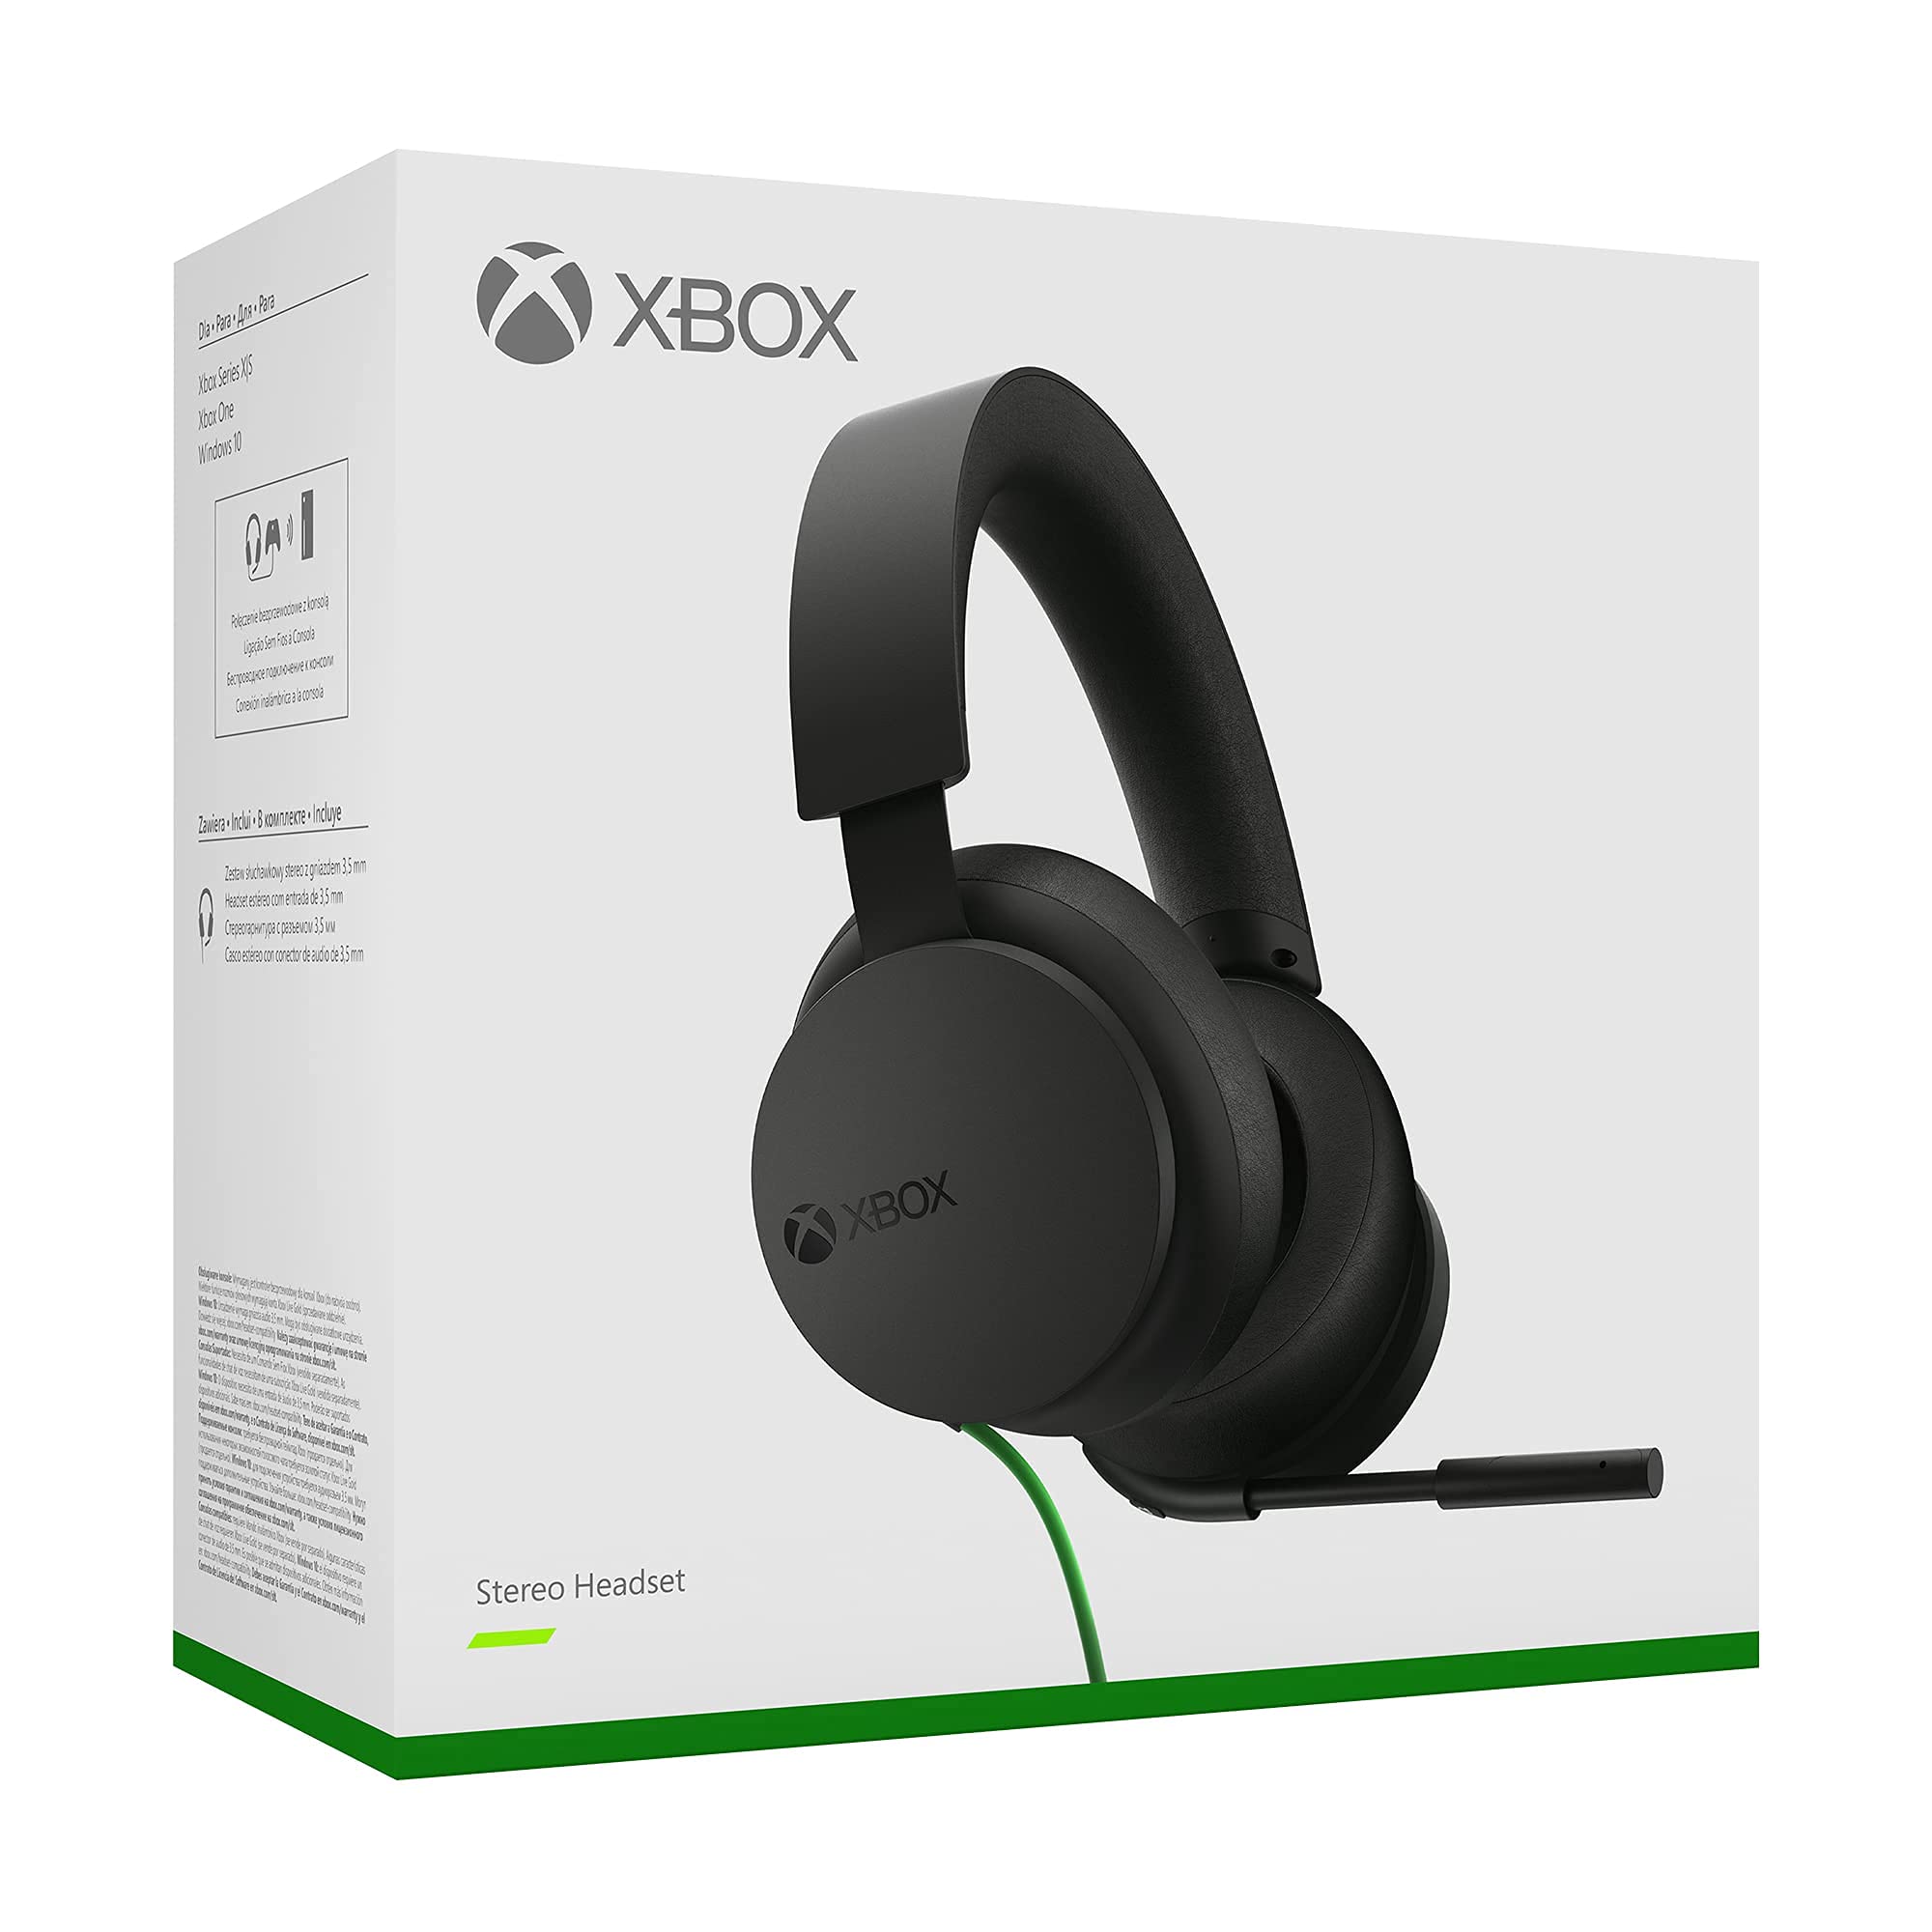 Xbox Stereo Headset for Xbox Series X|S, Xbox One, and Windows 10 Devices (Renewed)